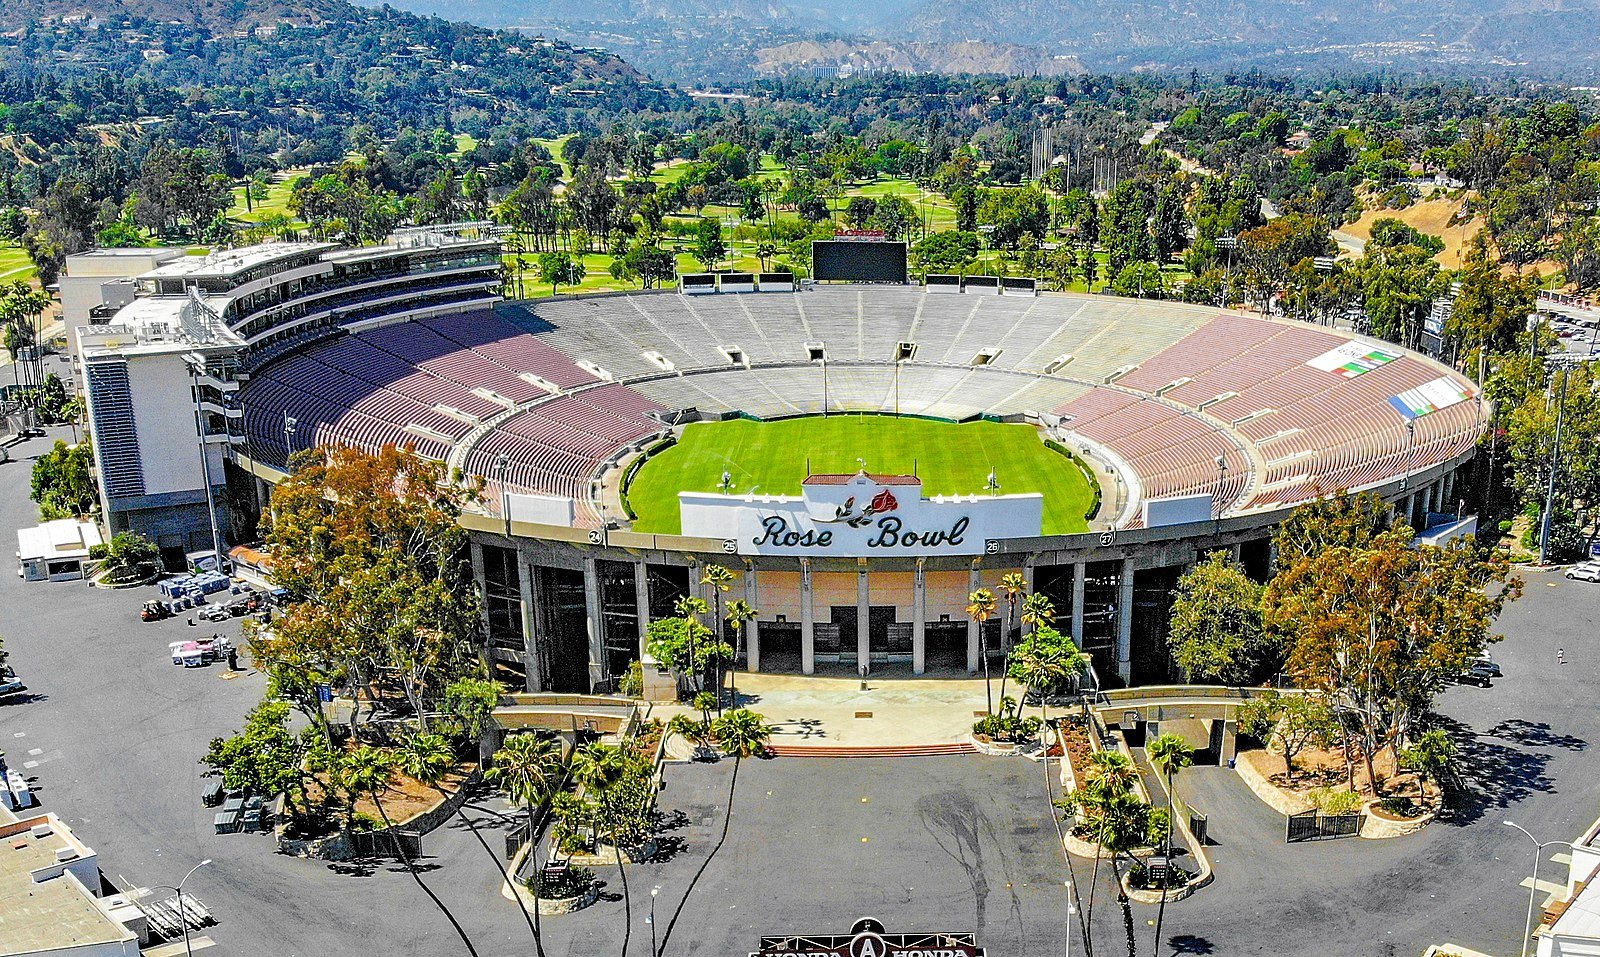 The Rose Bowl In Pasadena, California. Photo Credit: Ted Eytan | Wikimedia Commons